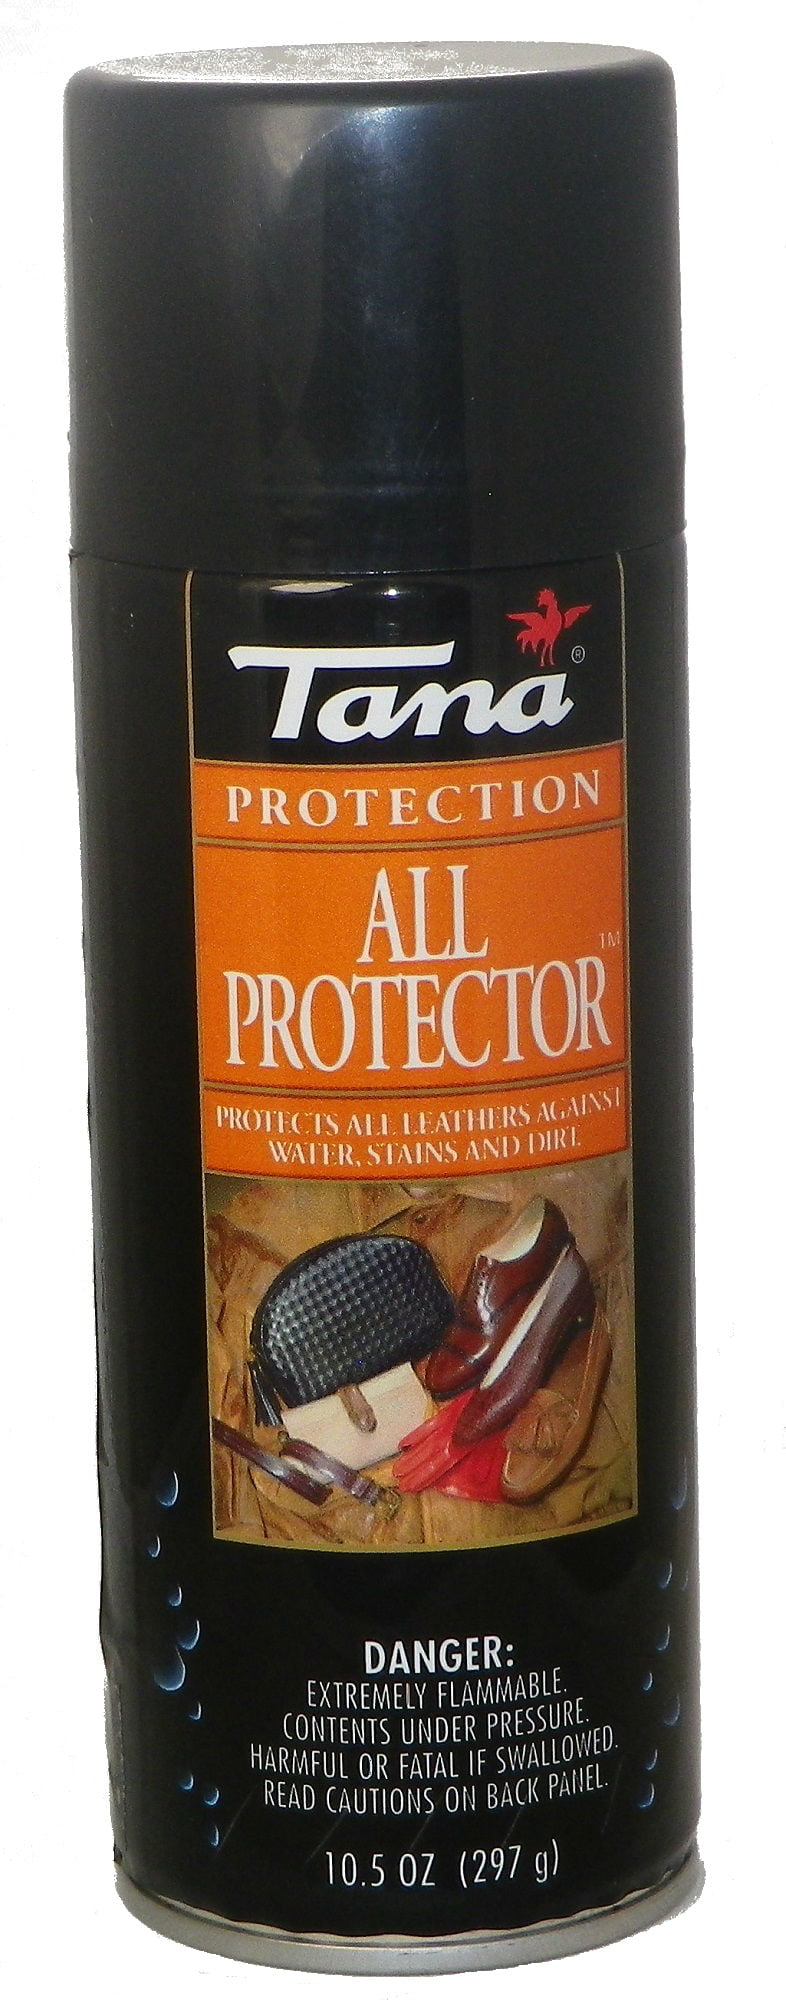 Tana Protection All Protector For 